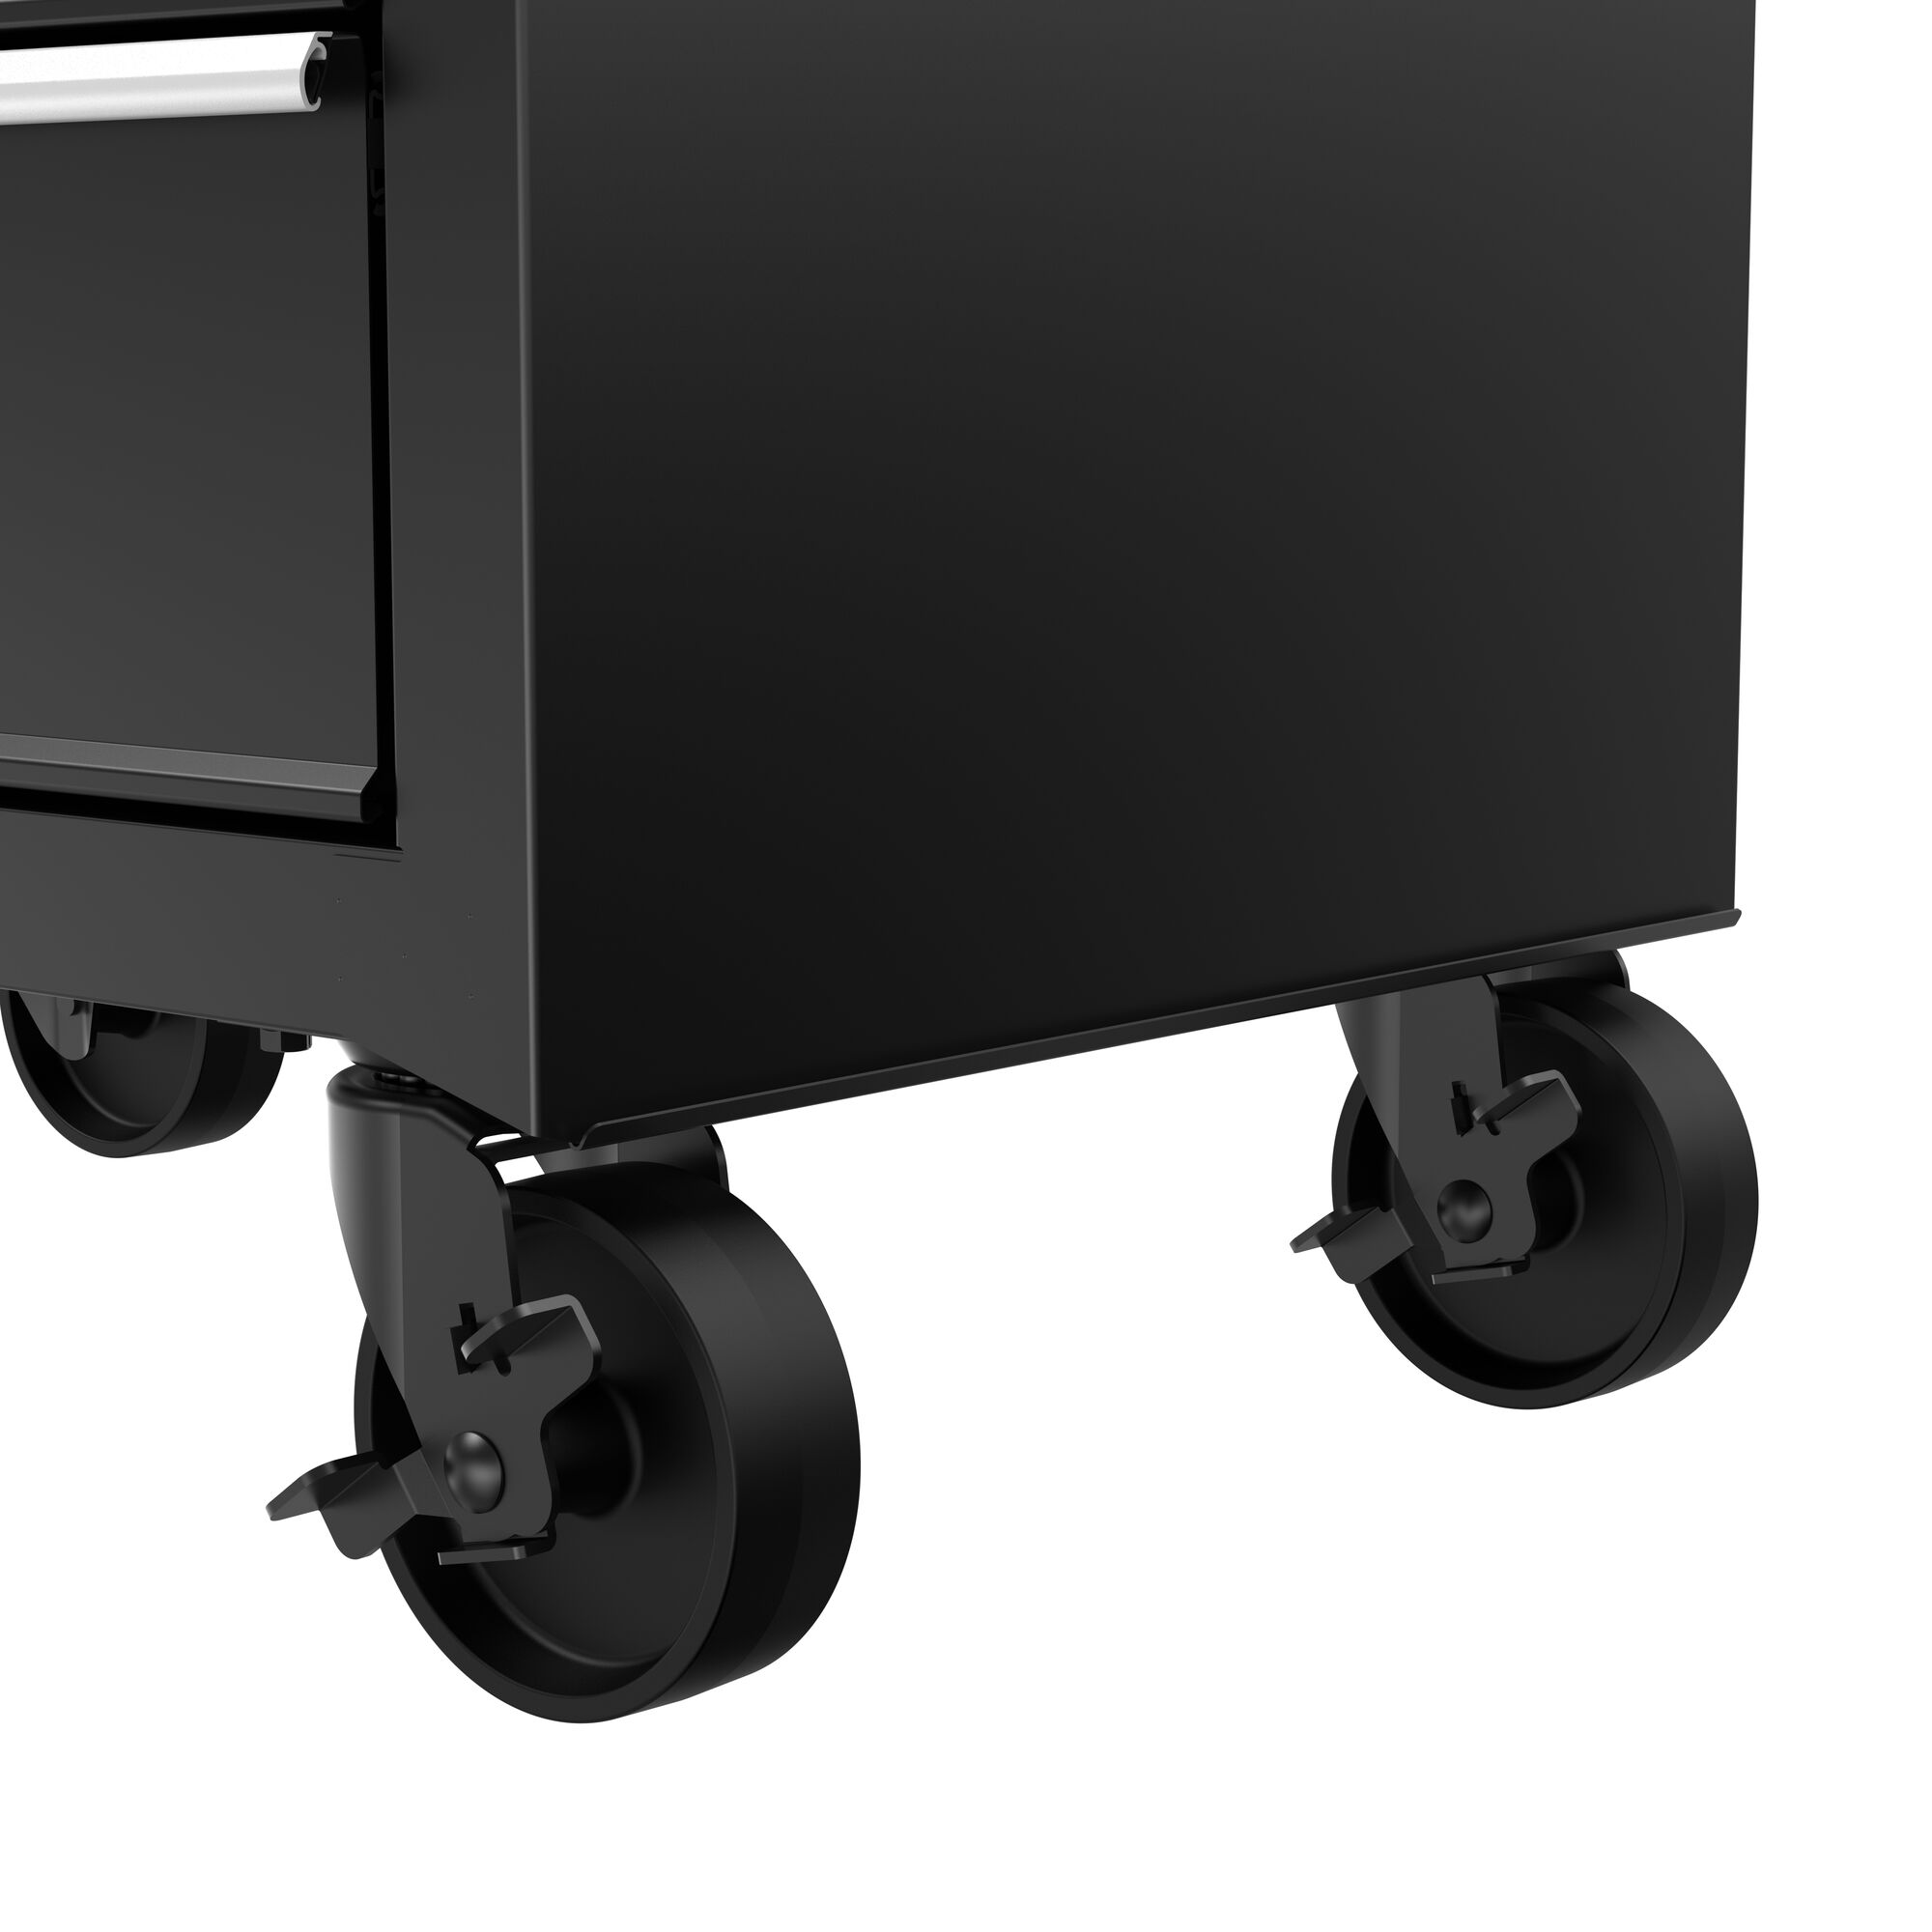 CRAFTSMAN 4 drawer cabinet with smooth mobility wheels feature highlight